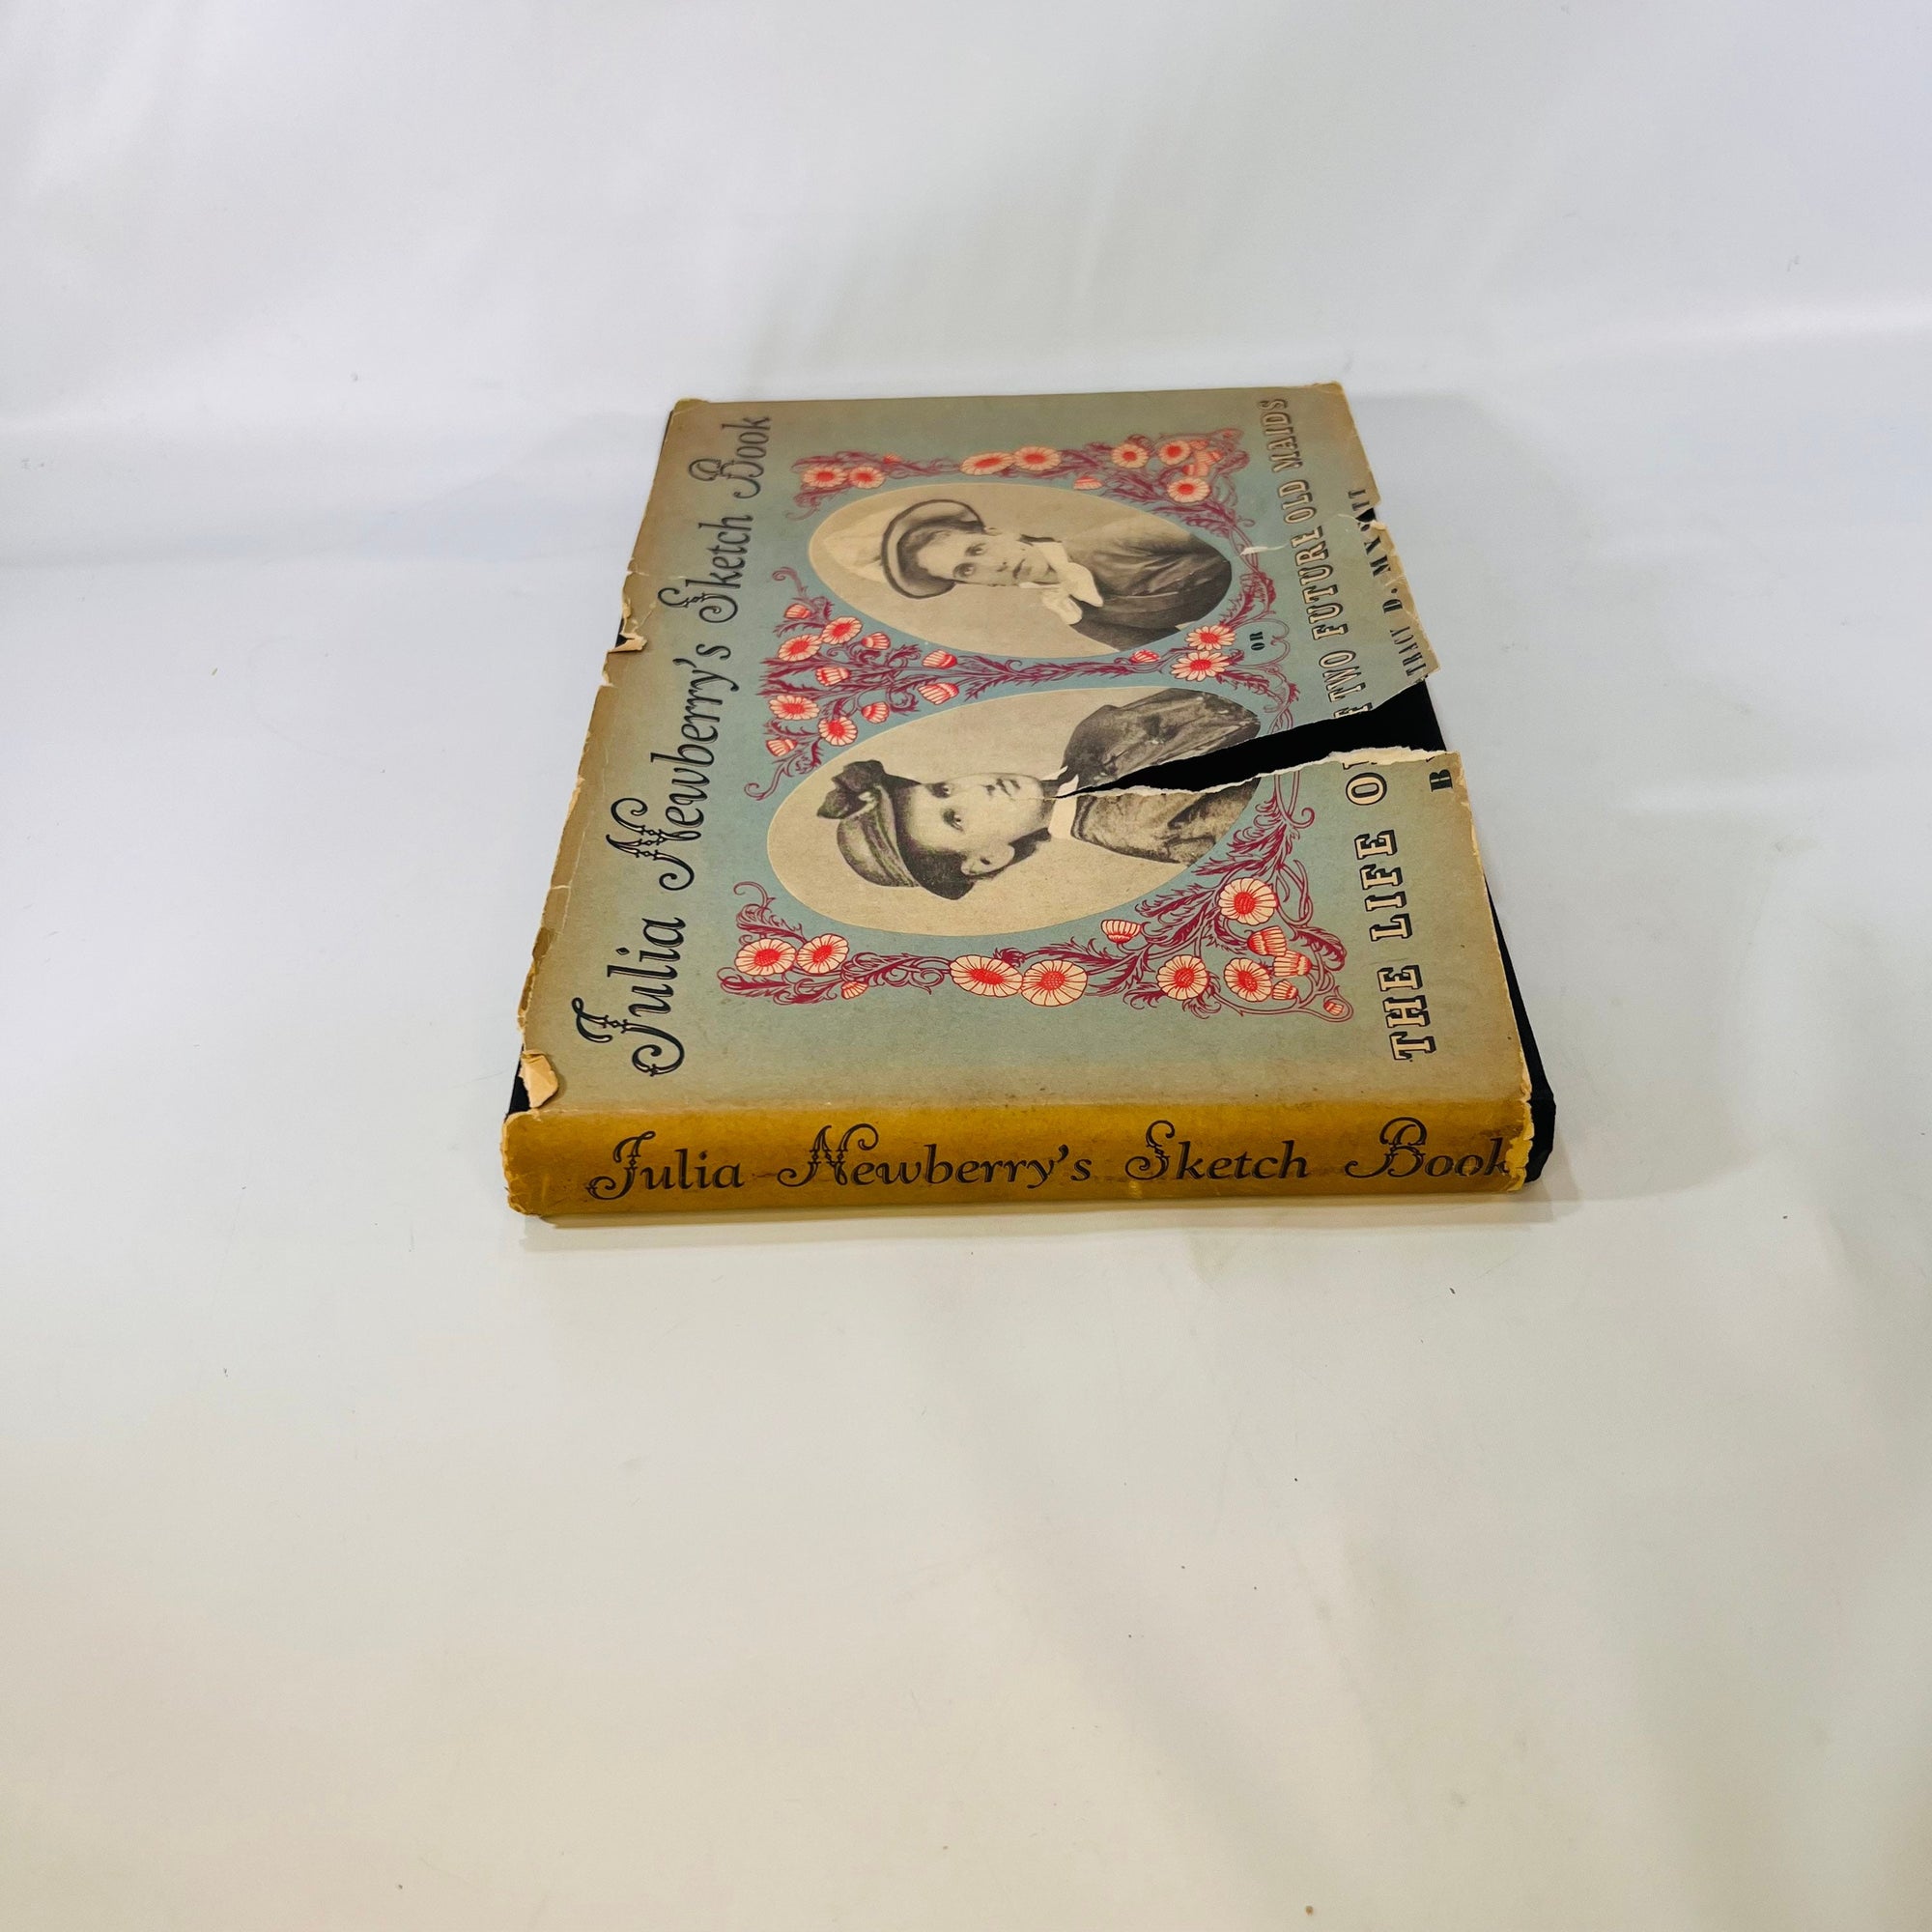 Julia Newberrys Sketch Book the Life of Two Future old Maid's by Tracy D Mygatt 1934 W W Norton & Company Vintage the Real Life Account Book